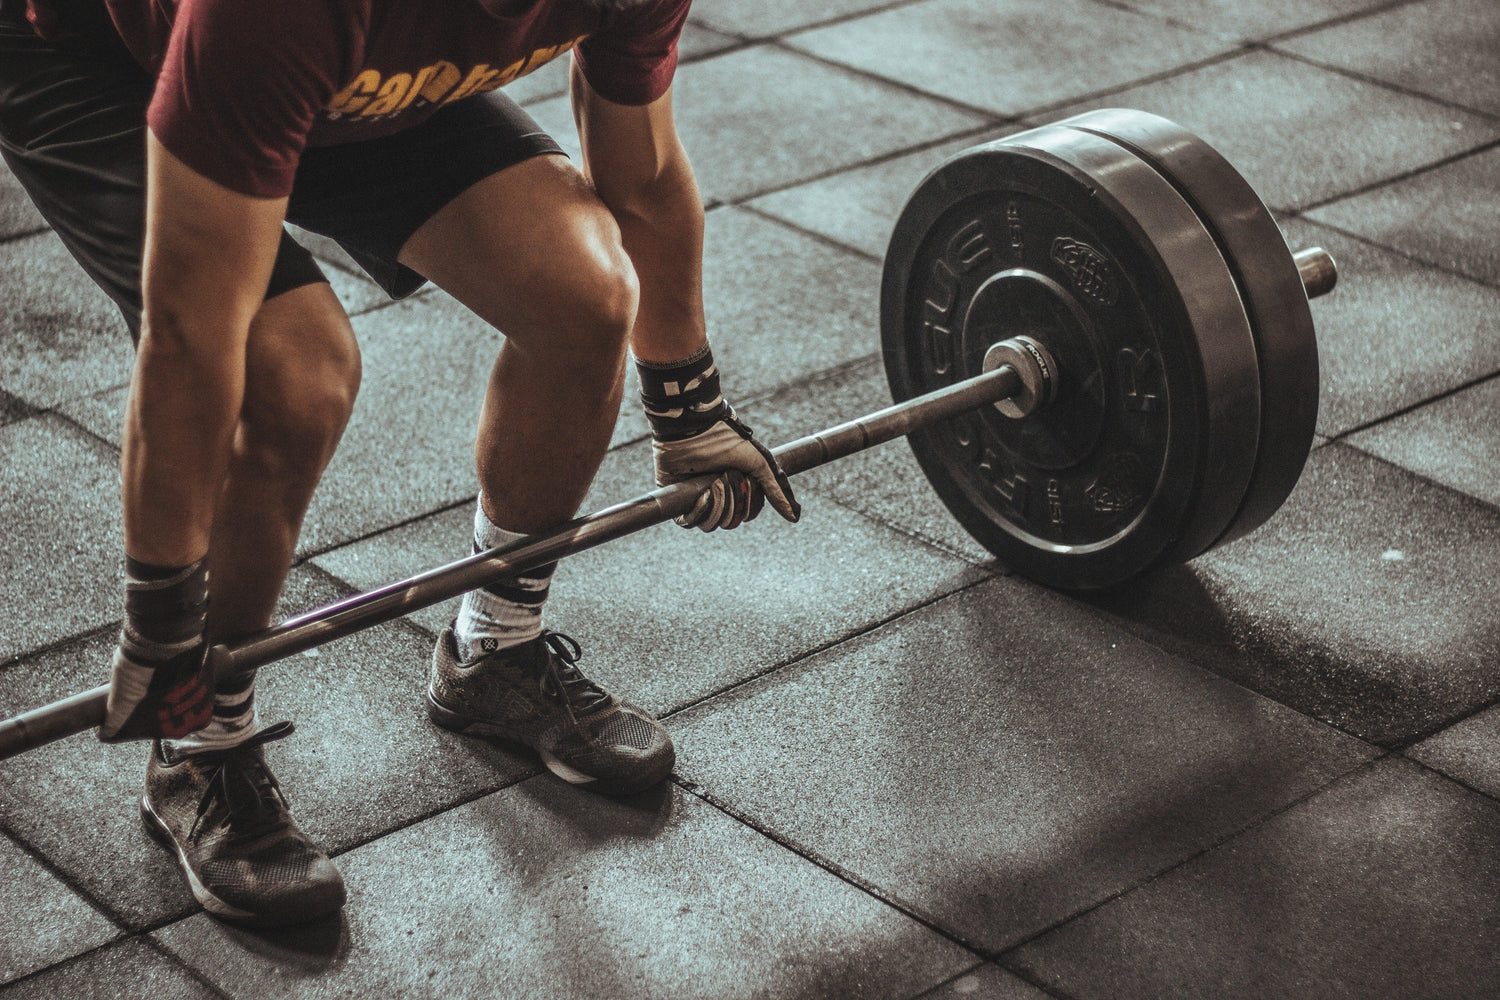 An Expert’s Take on Common Weightlifting Mistakes - Montreal Fitness